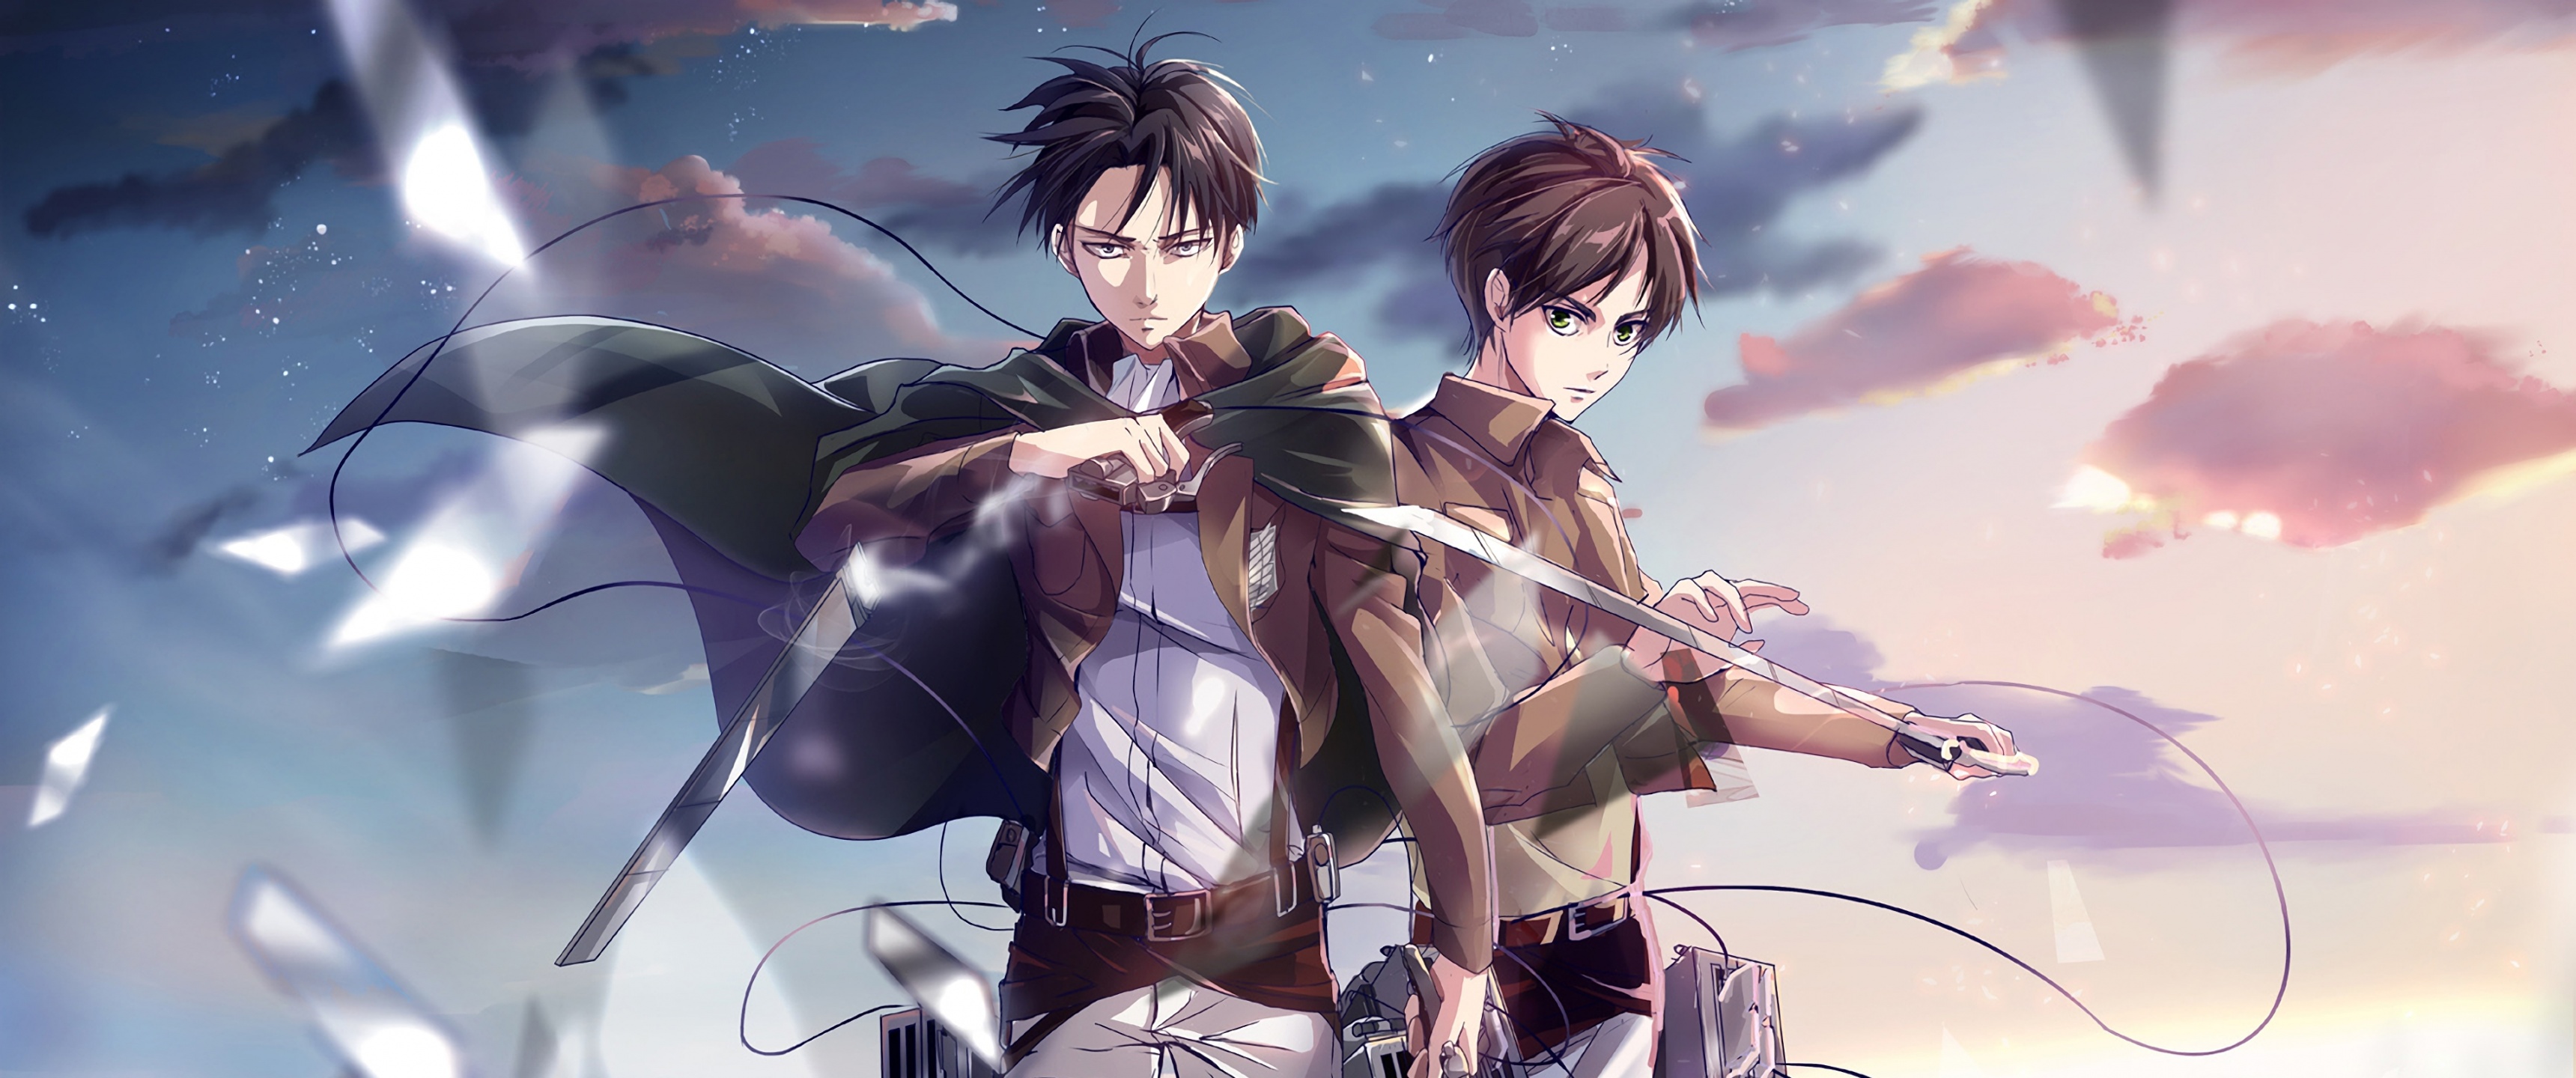 Wallpaper ID 374701  Anime Attack On Titan Phone Wallpaper Eren Yeager  1080x2160 free download